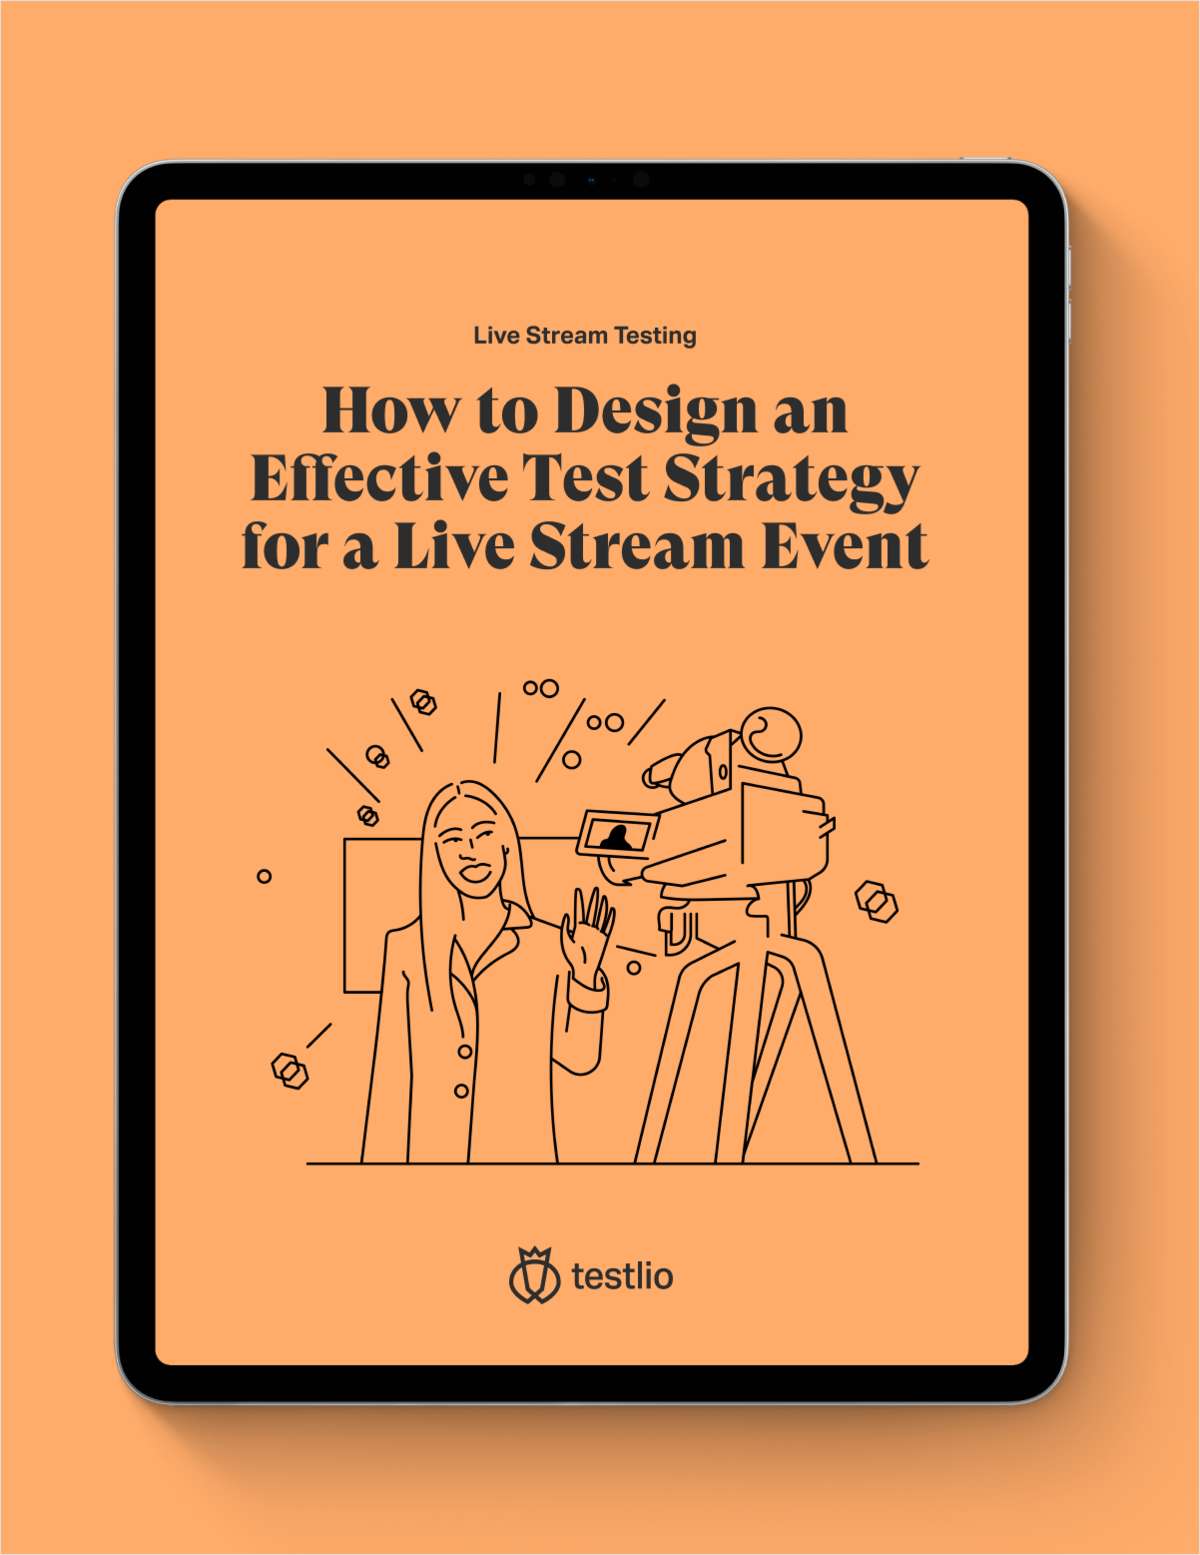 How to Design an Effective Test Strategy for a Live Stream Event